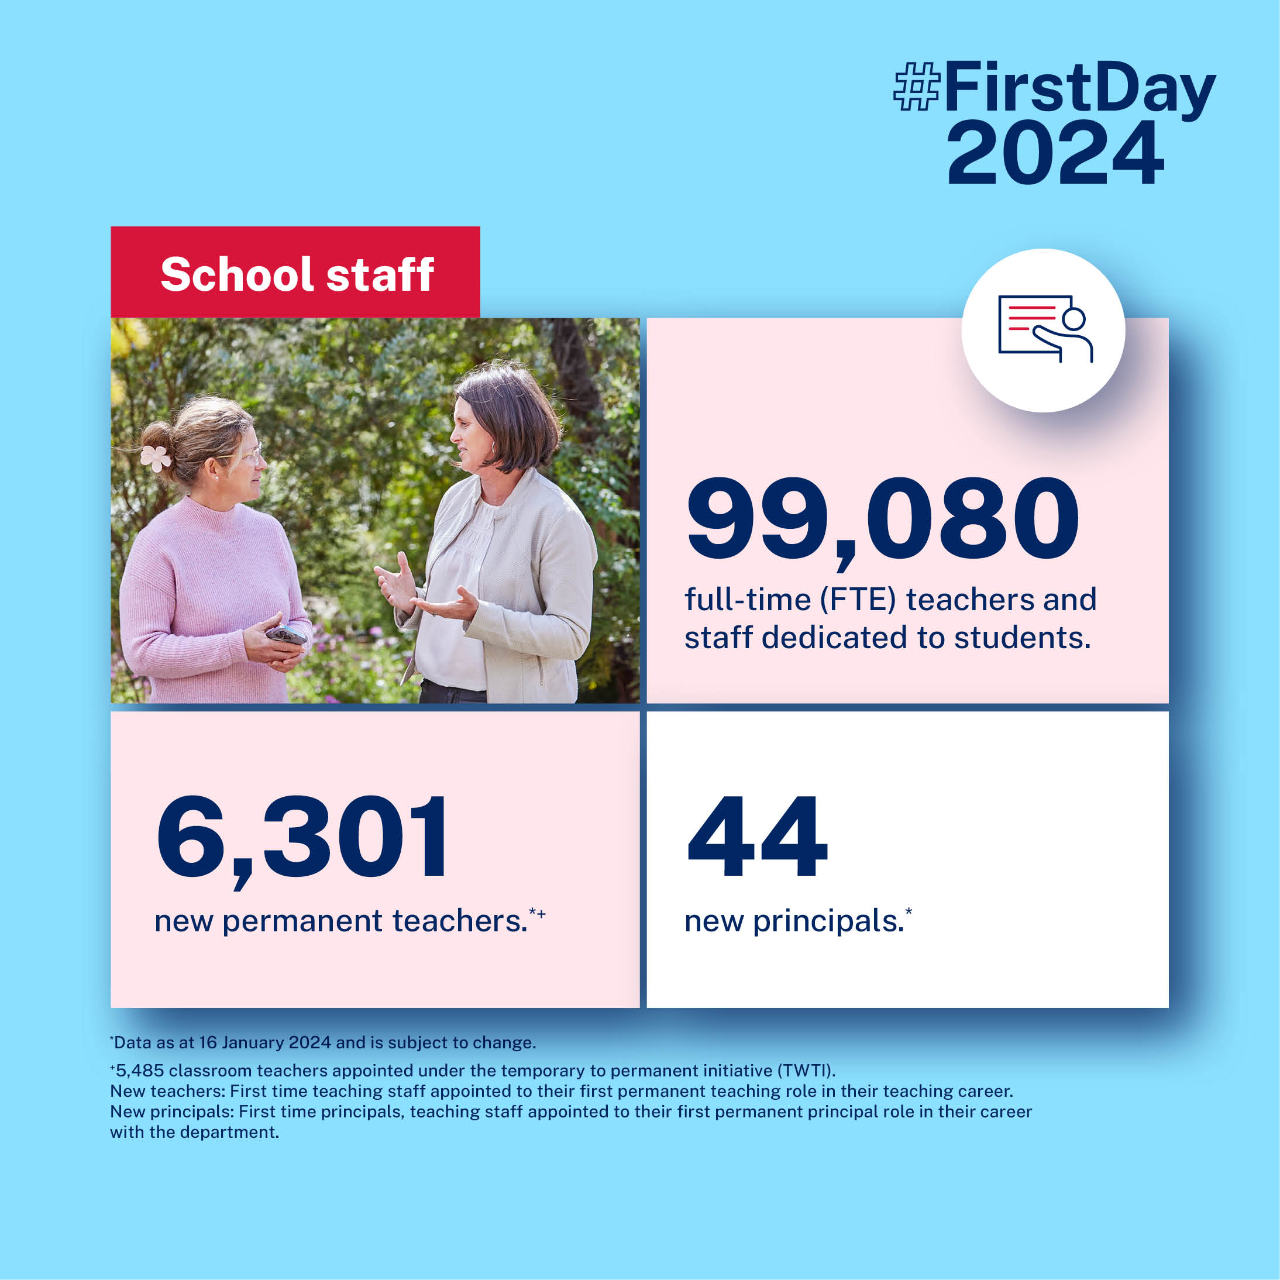 infographic stating 6301 new permanent teachers, 99080 full time teachers and 44 new principals